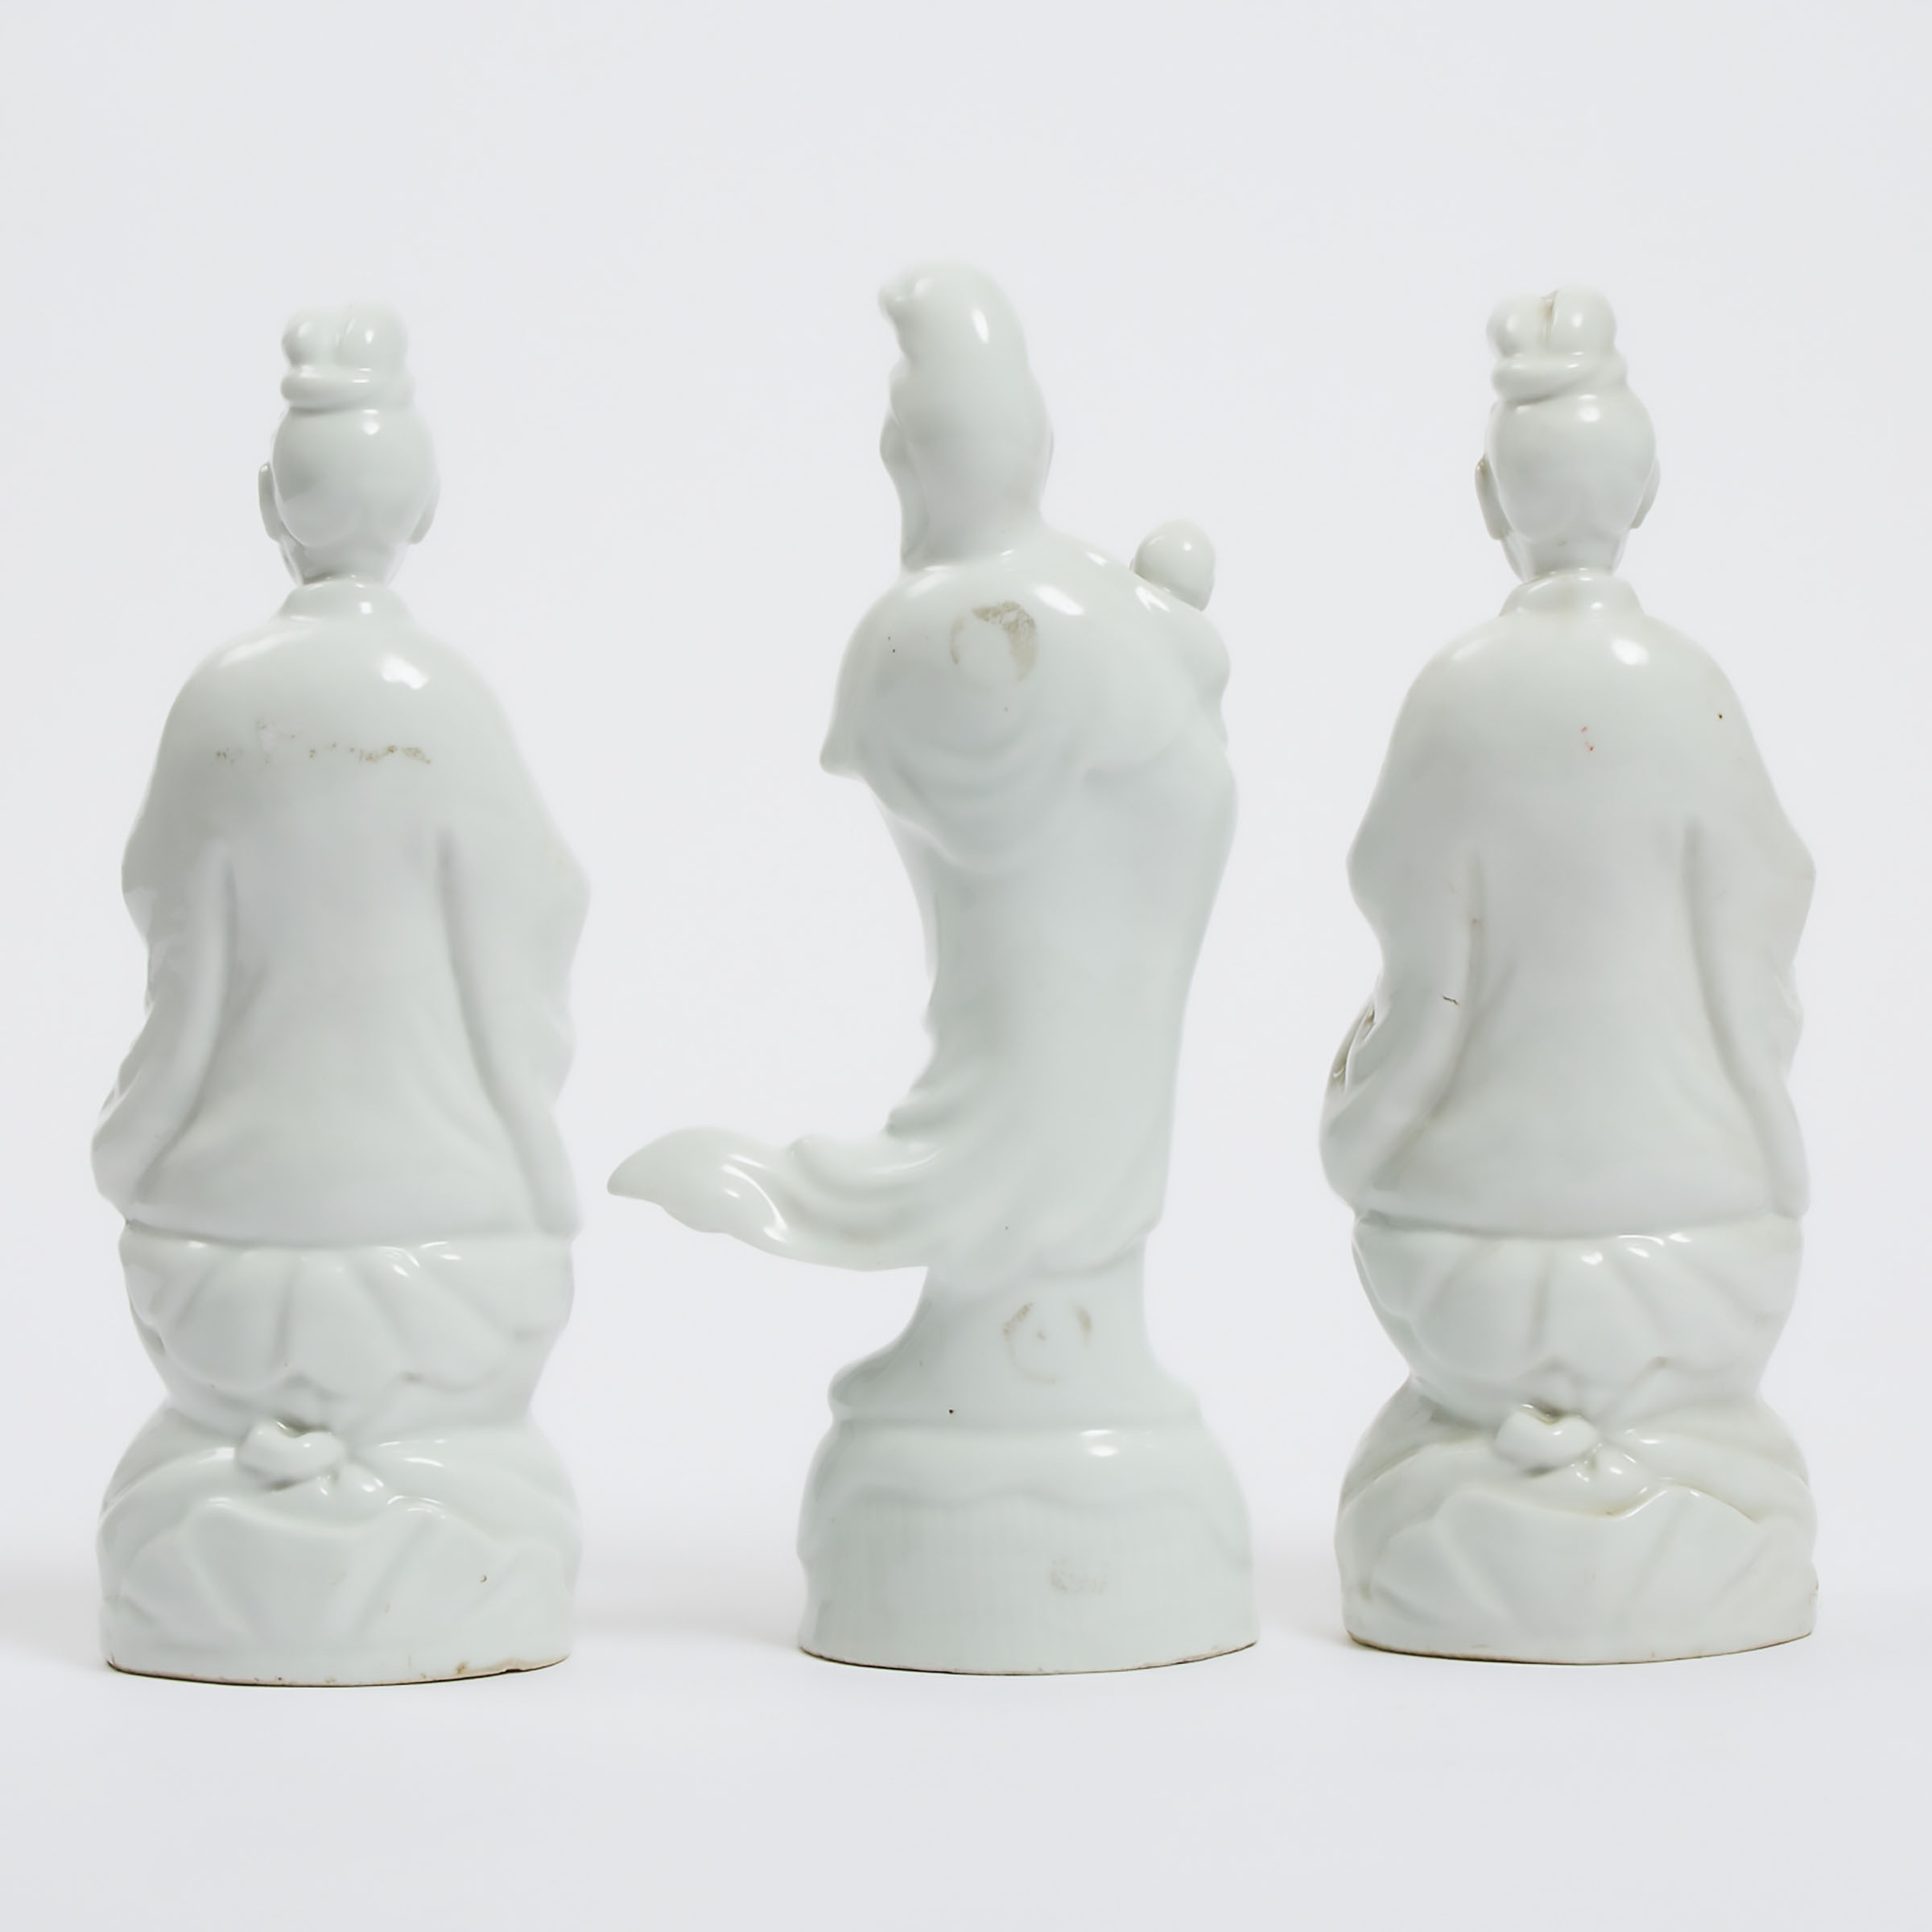 A Group of Three Blanc de Chine Figures, Mid 20th Century